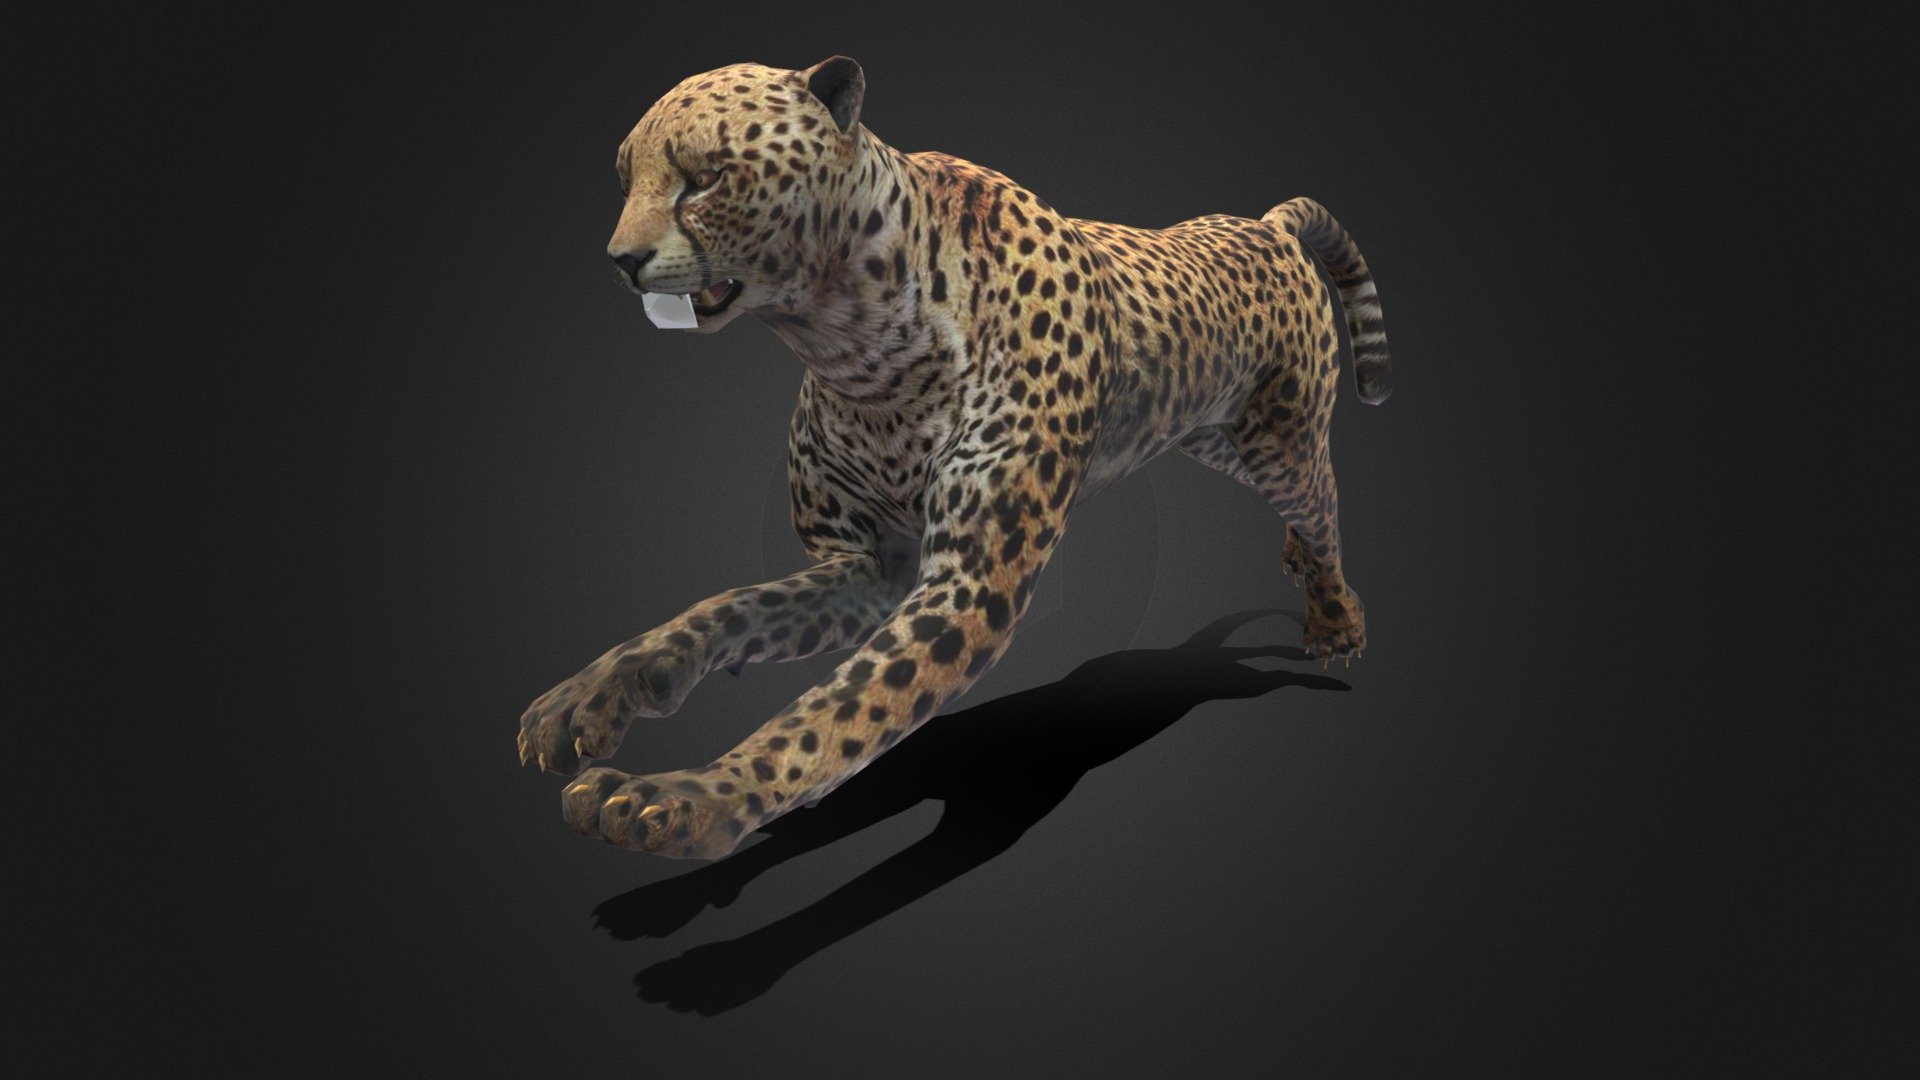 Cheetah Model has Rigged and animated. The scene includes original mesh

SOFTWARE

3dsMax 2017 - Standard &amp; Vray Maya 2017 - Maya Software &amp; Arnold Blender FBX OBJ (Geometry, UV's) TEXTURES / SHADERS

4K textures 3dsMax - Standard &amp; Vray Maya - Maya Software &amp; Arnold Blender Standard

Comes with a Diffuse map, normal and specular 3d model